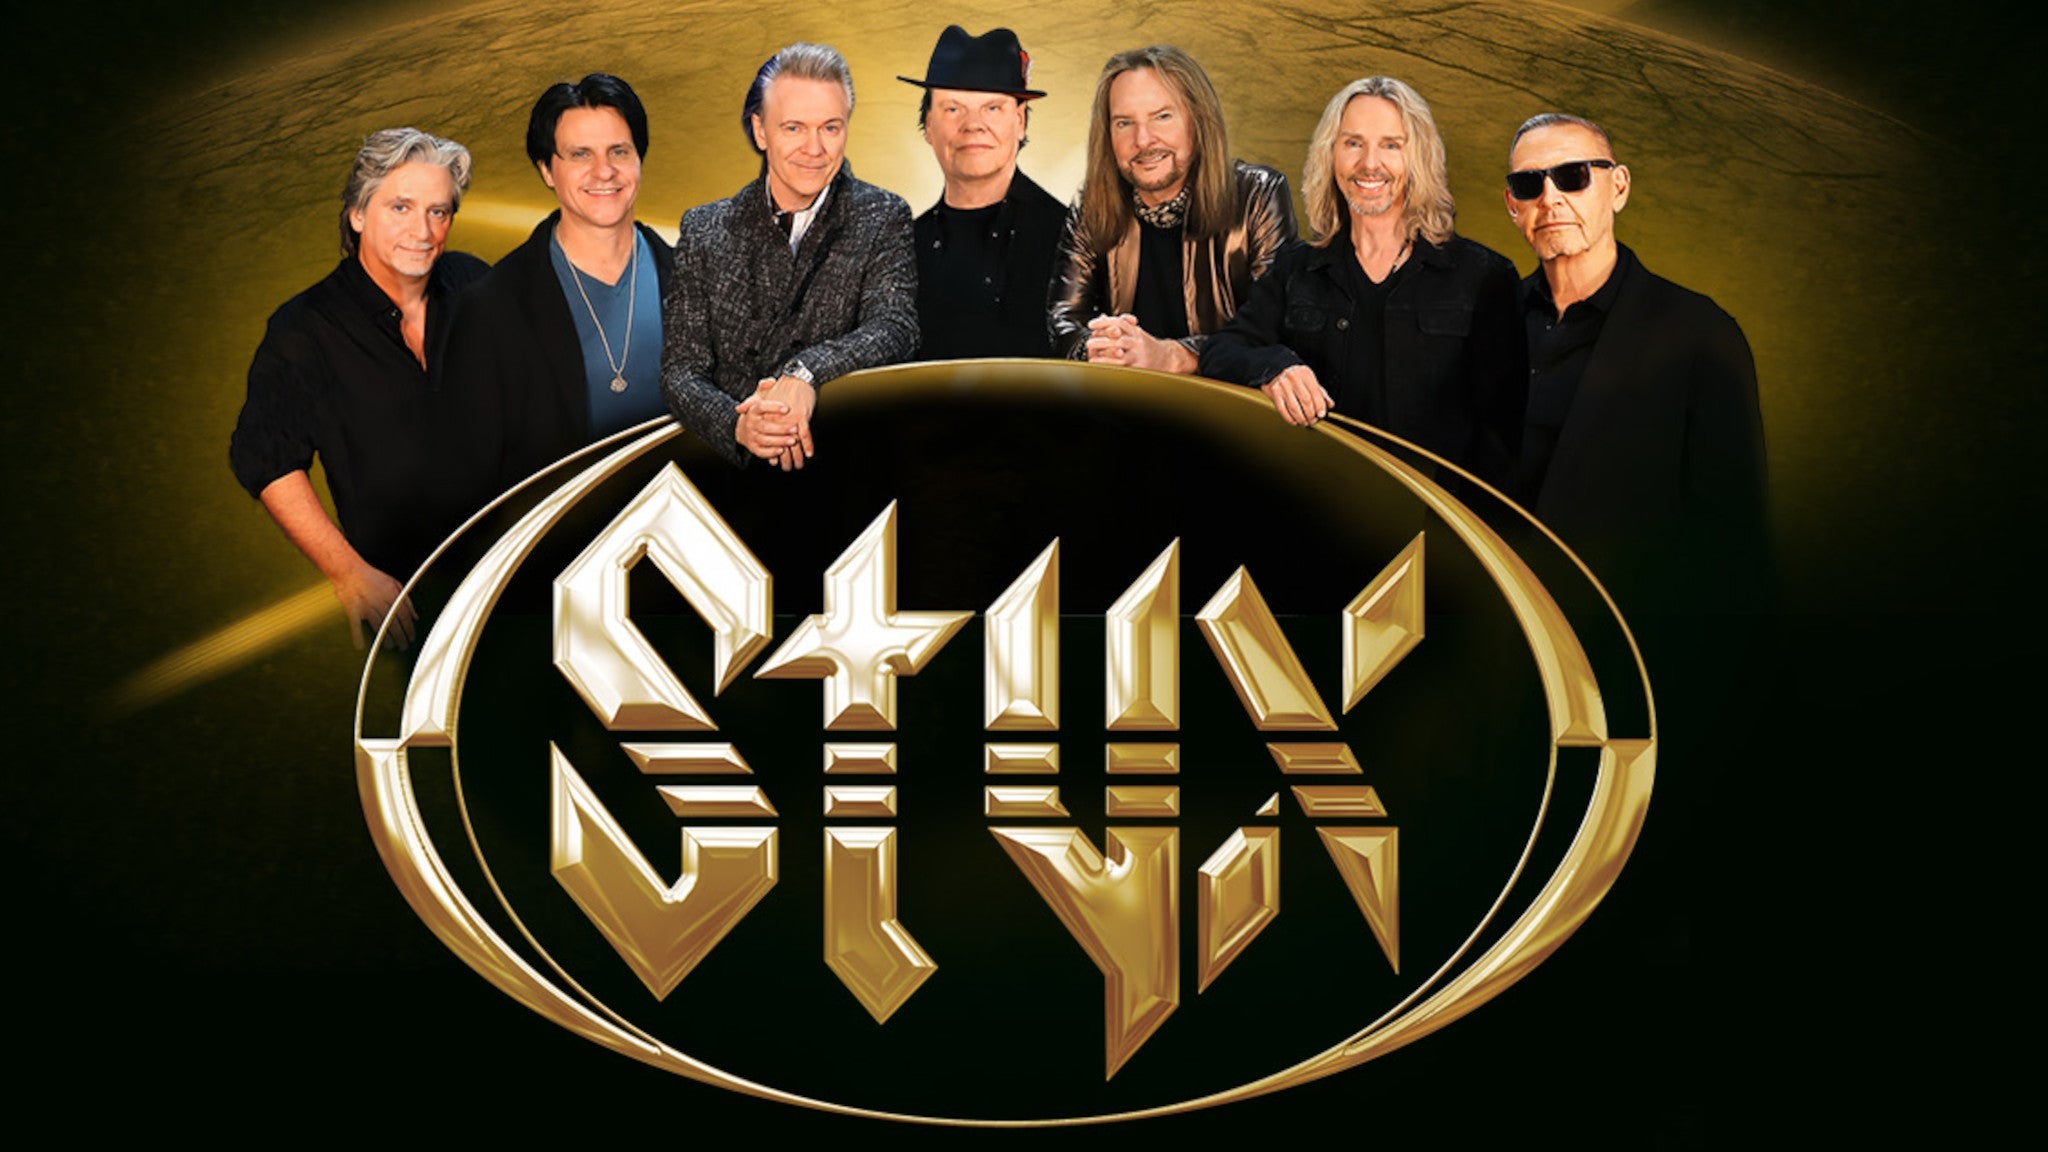 Styx pre-sale code for real tickets in Halifax